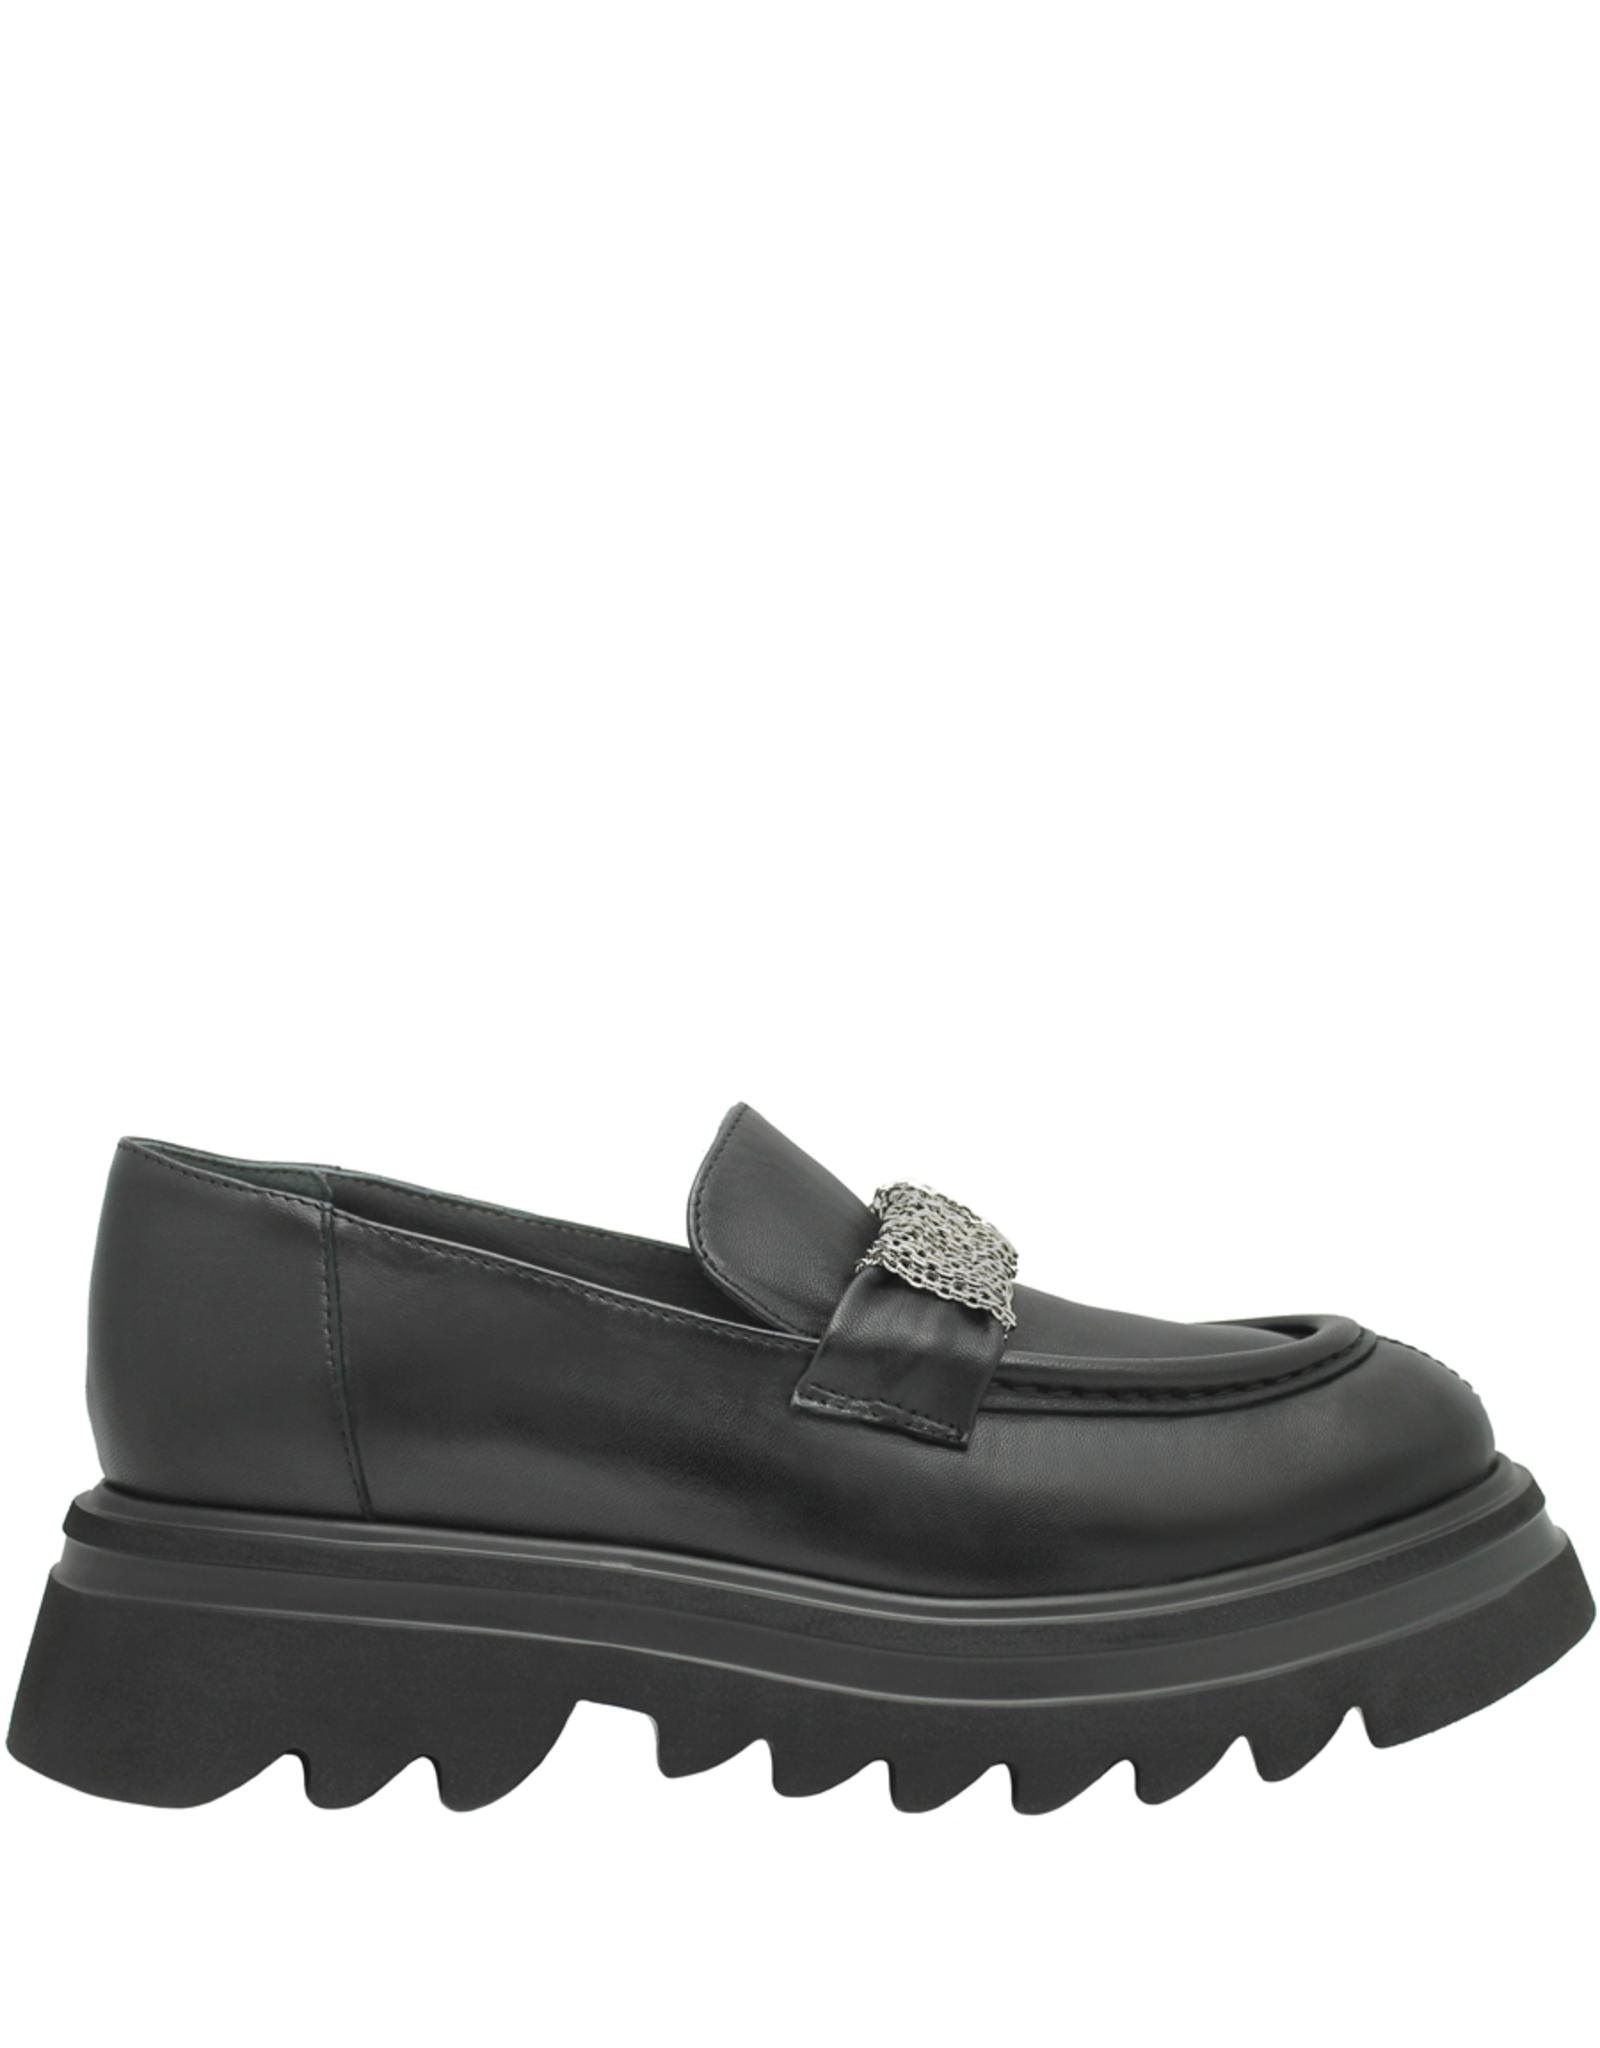 Now Now N42R Black Calf Tread Sole Loafer 8388